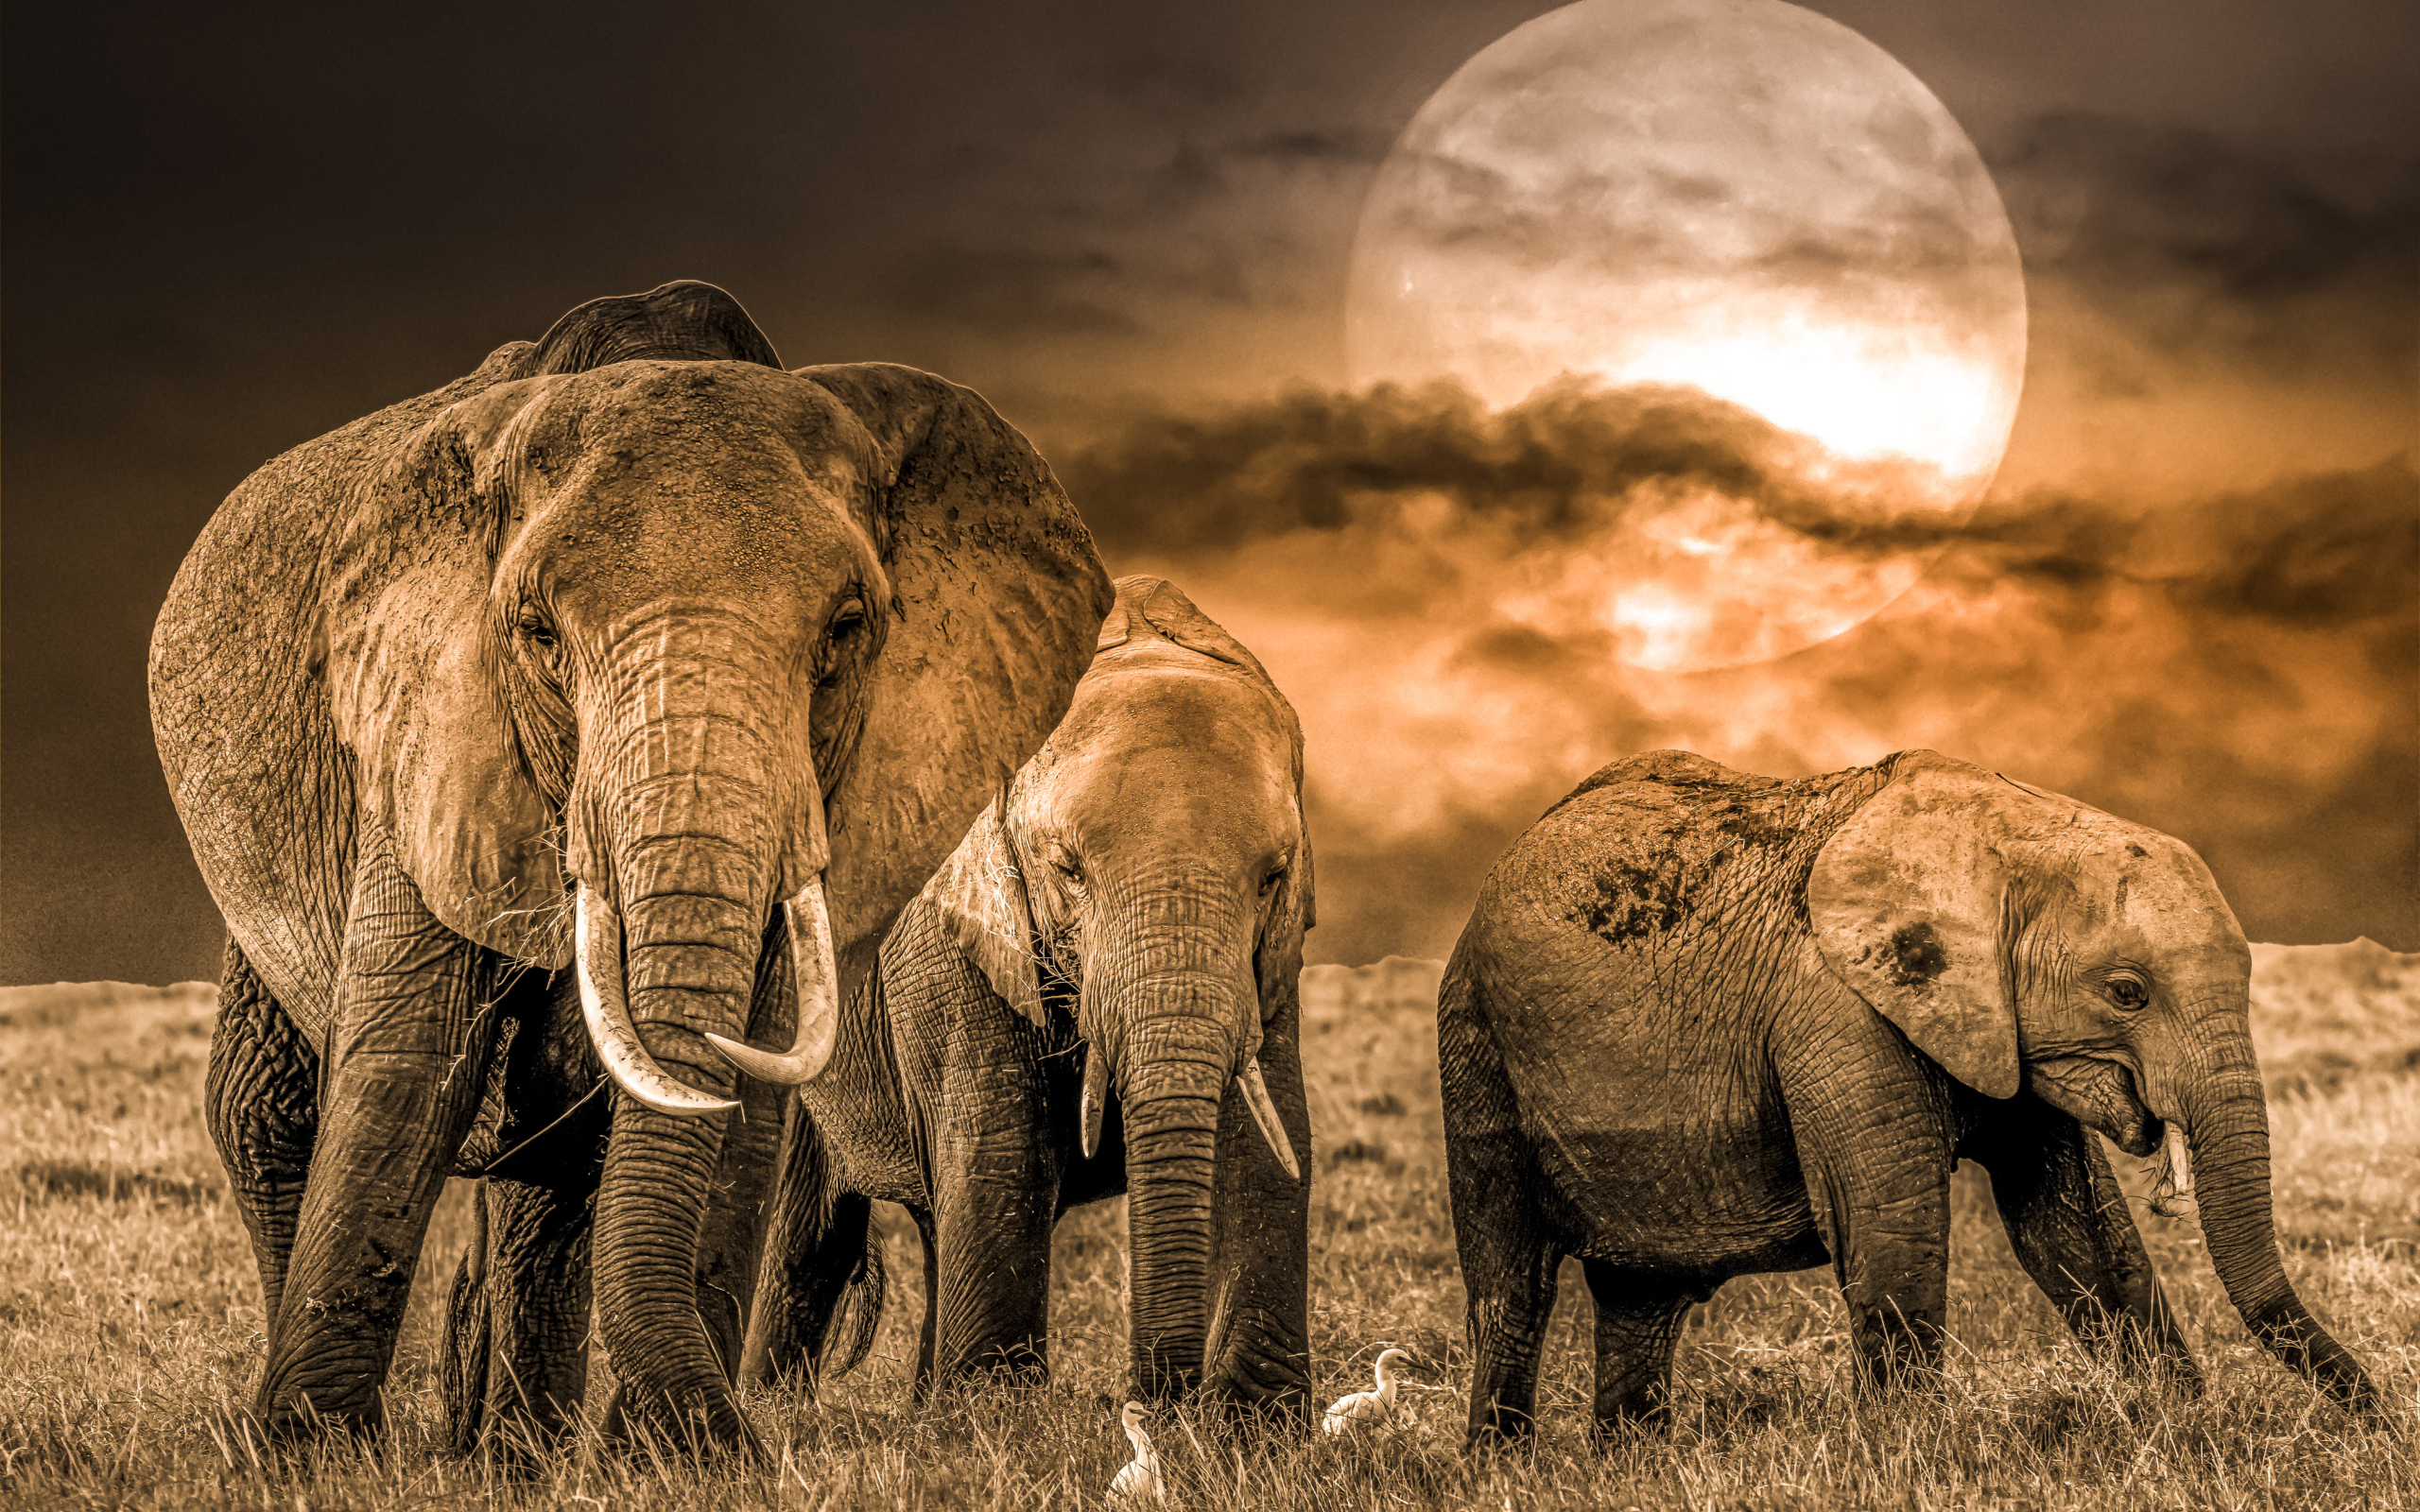 Herd of elephants against the backdrop of the moon